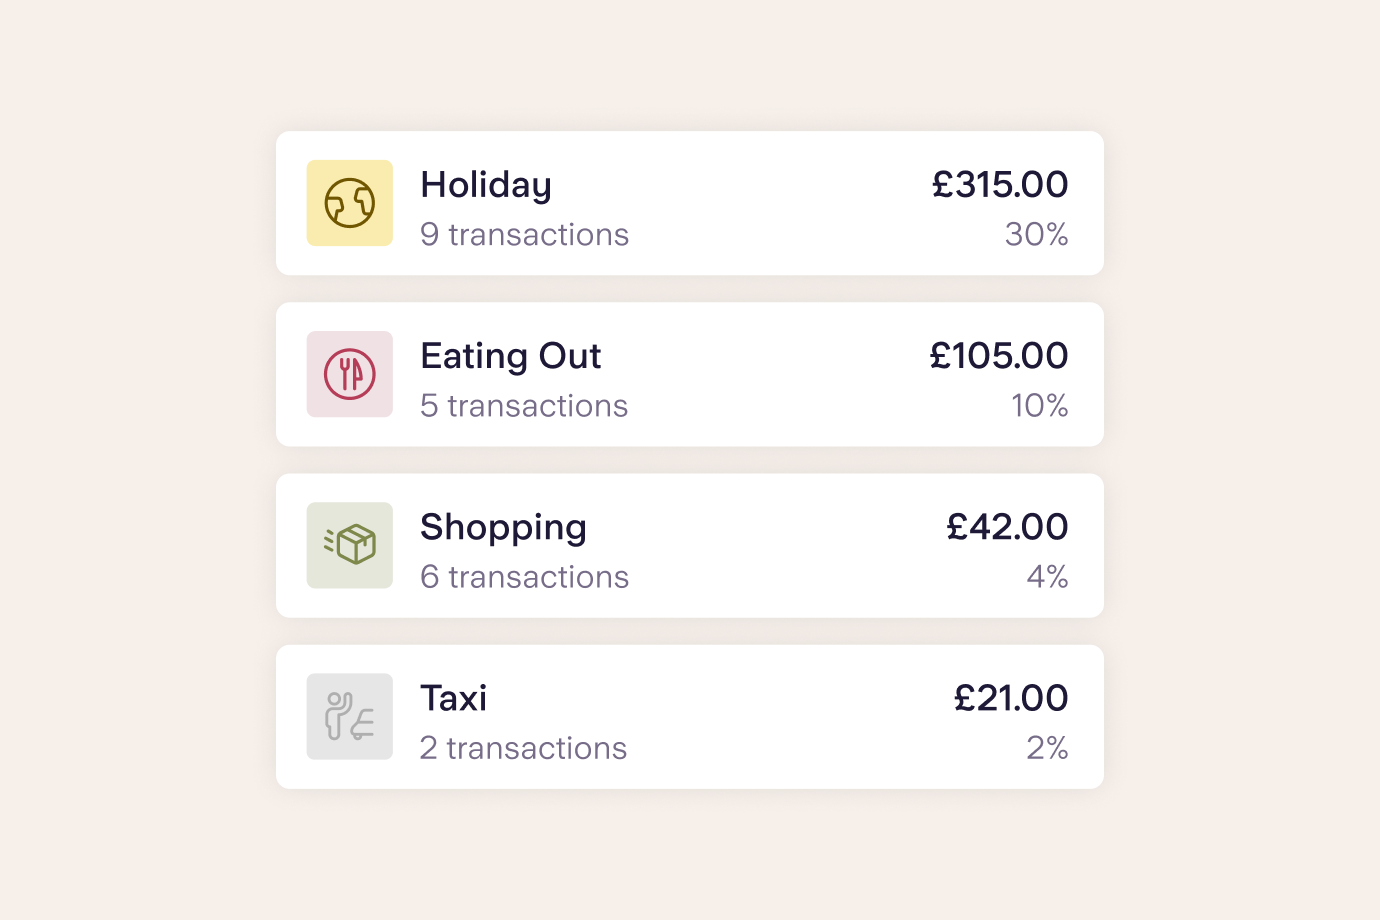 A demonstration of the Starling Bank app's spending categories feature. Holiday spending category with 9 transactions totalling £315, 30% of total spend. Eating out spending category with 5 transactions totalling £105, 10% of total spend. Shopping spending category with 6 transactions totalling £42, 4% of total spend. Taxi spending category with 2 transactions totalling £21, 2% of total spend.